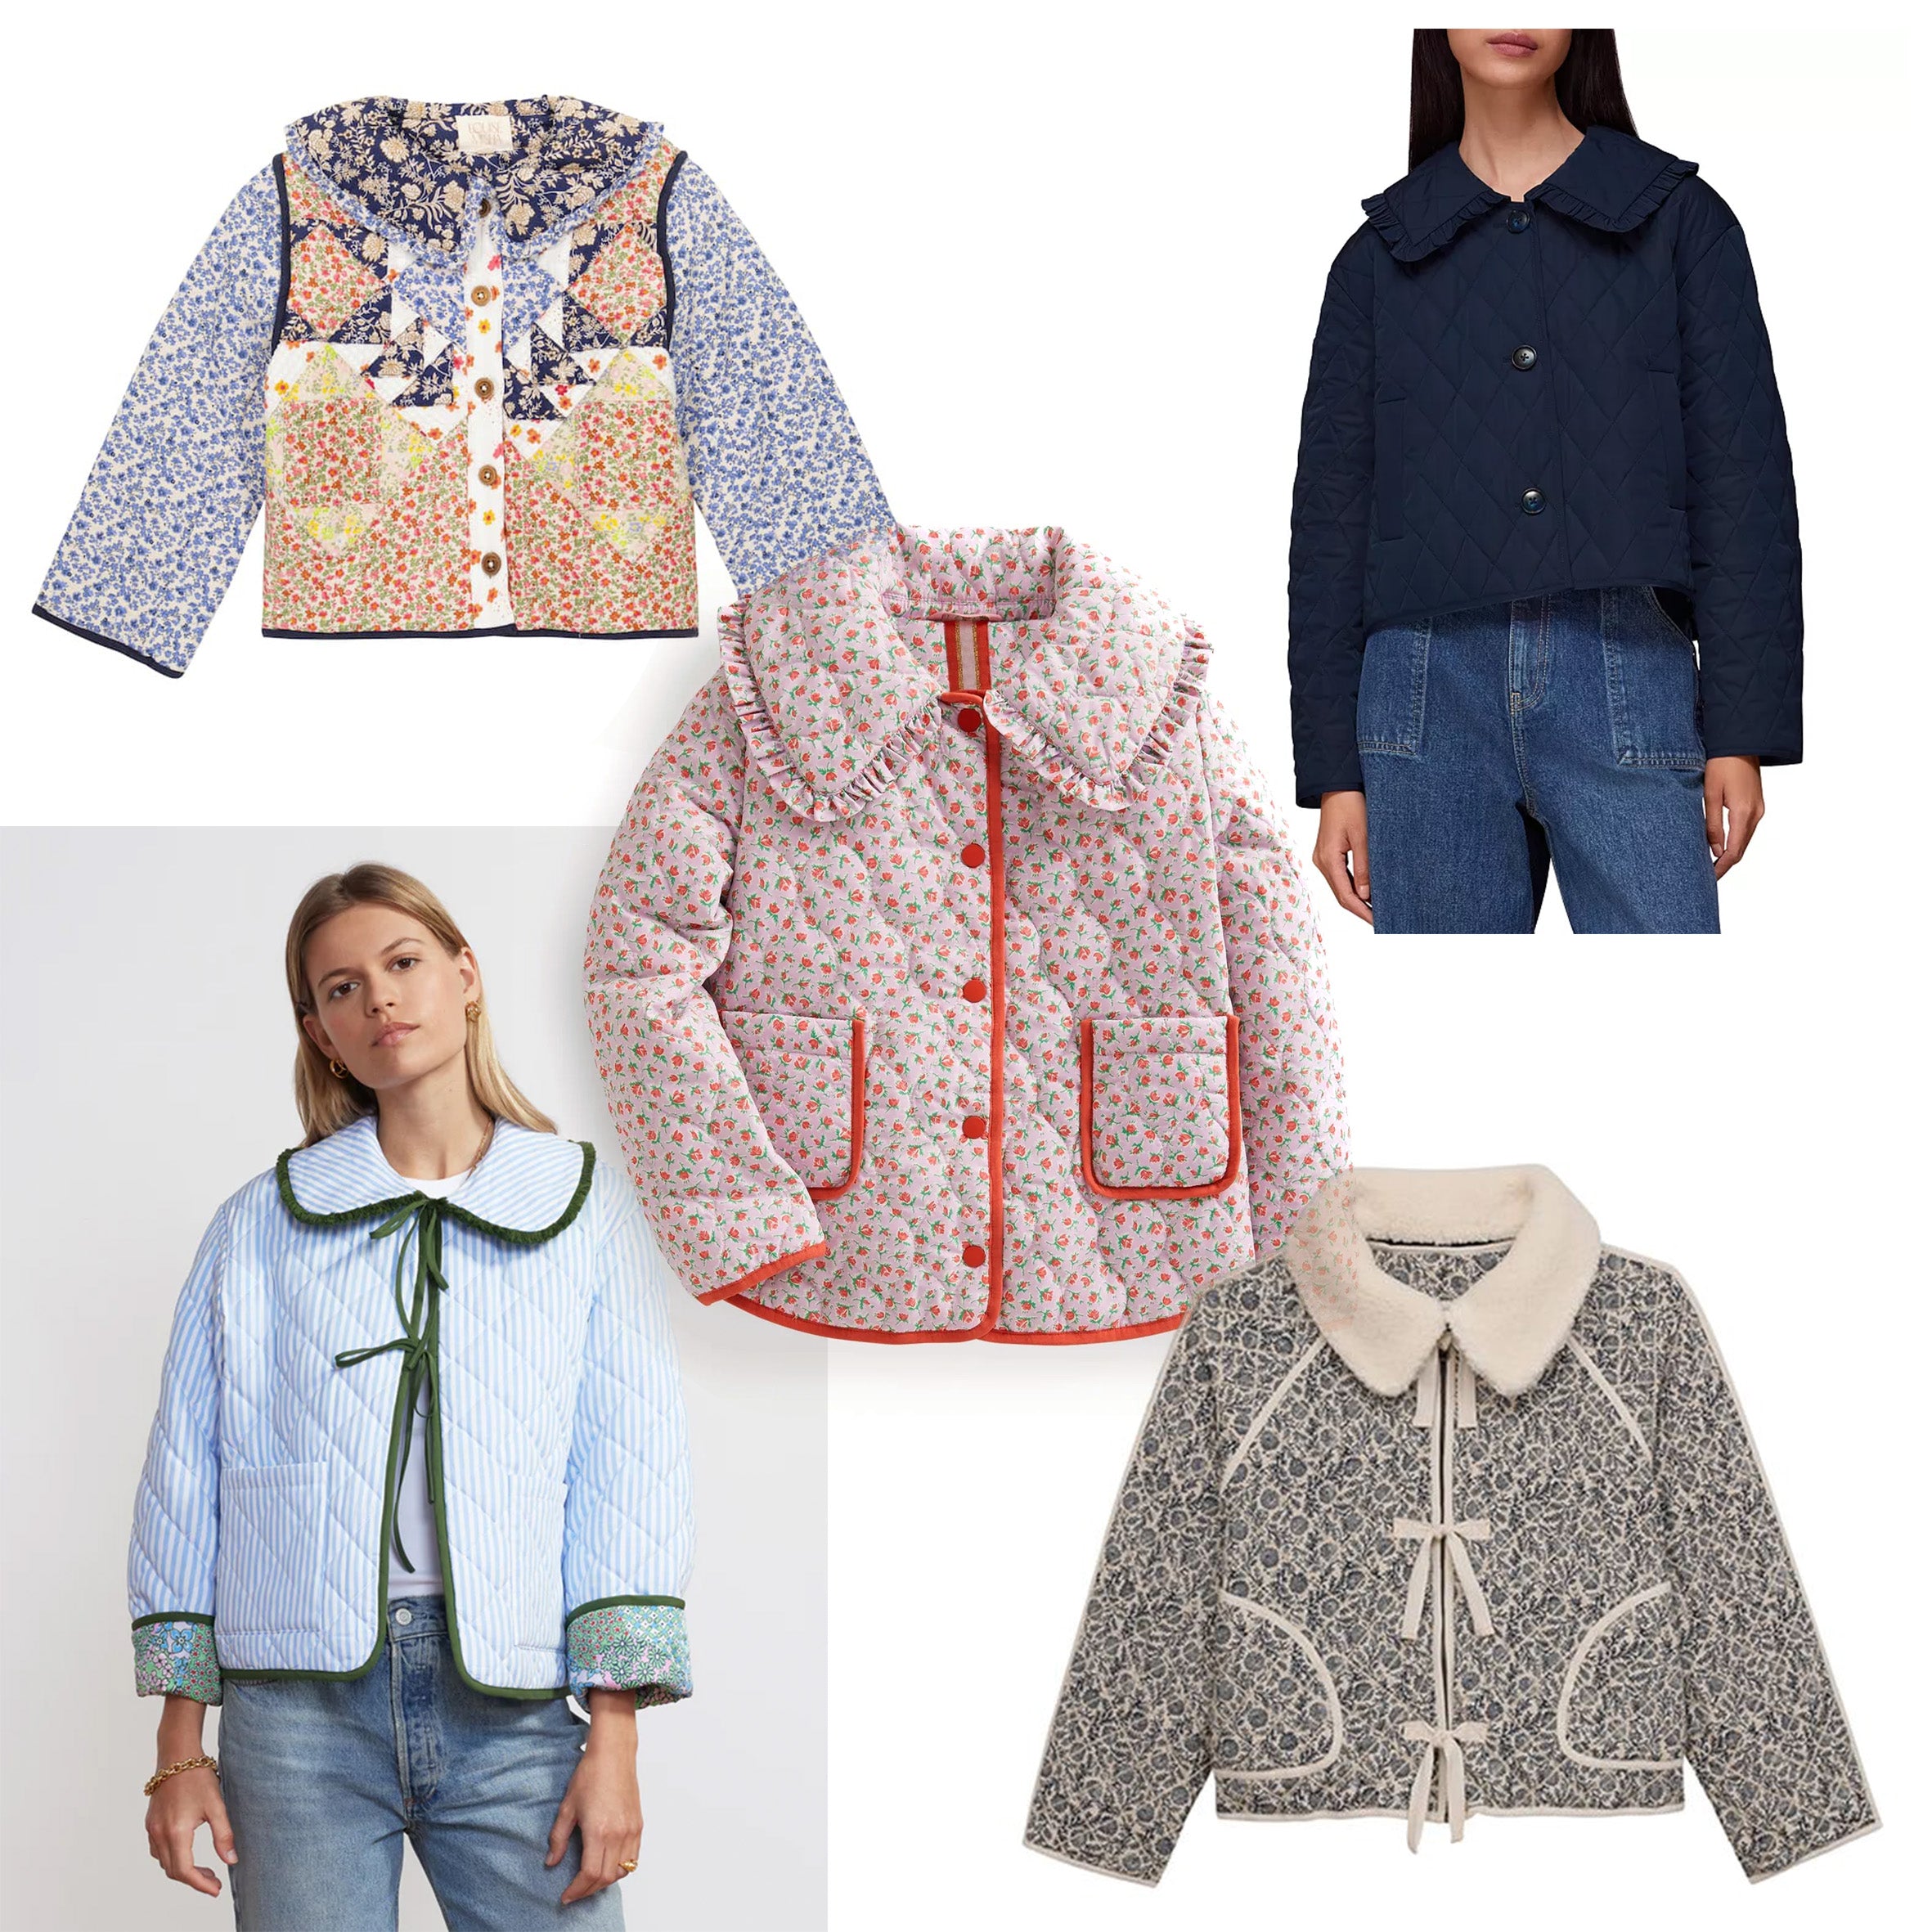 5 ready-to-wear quilted jackets with collars